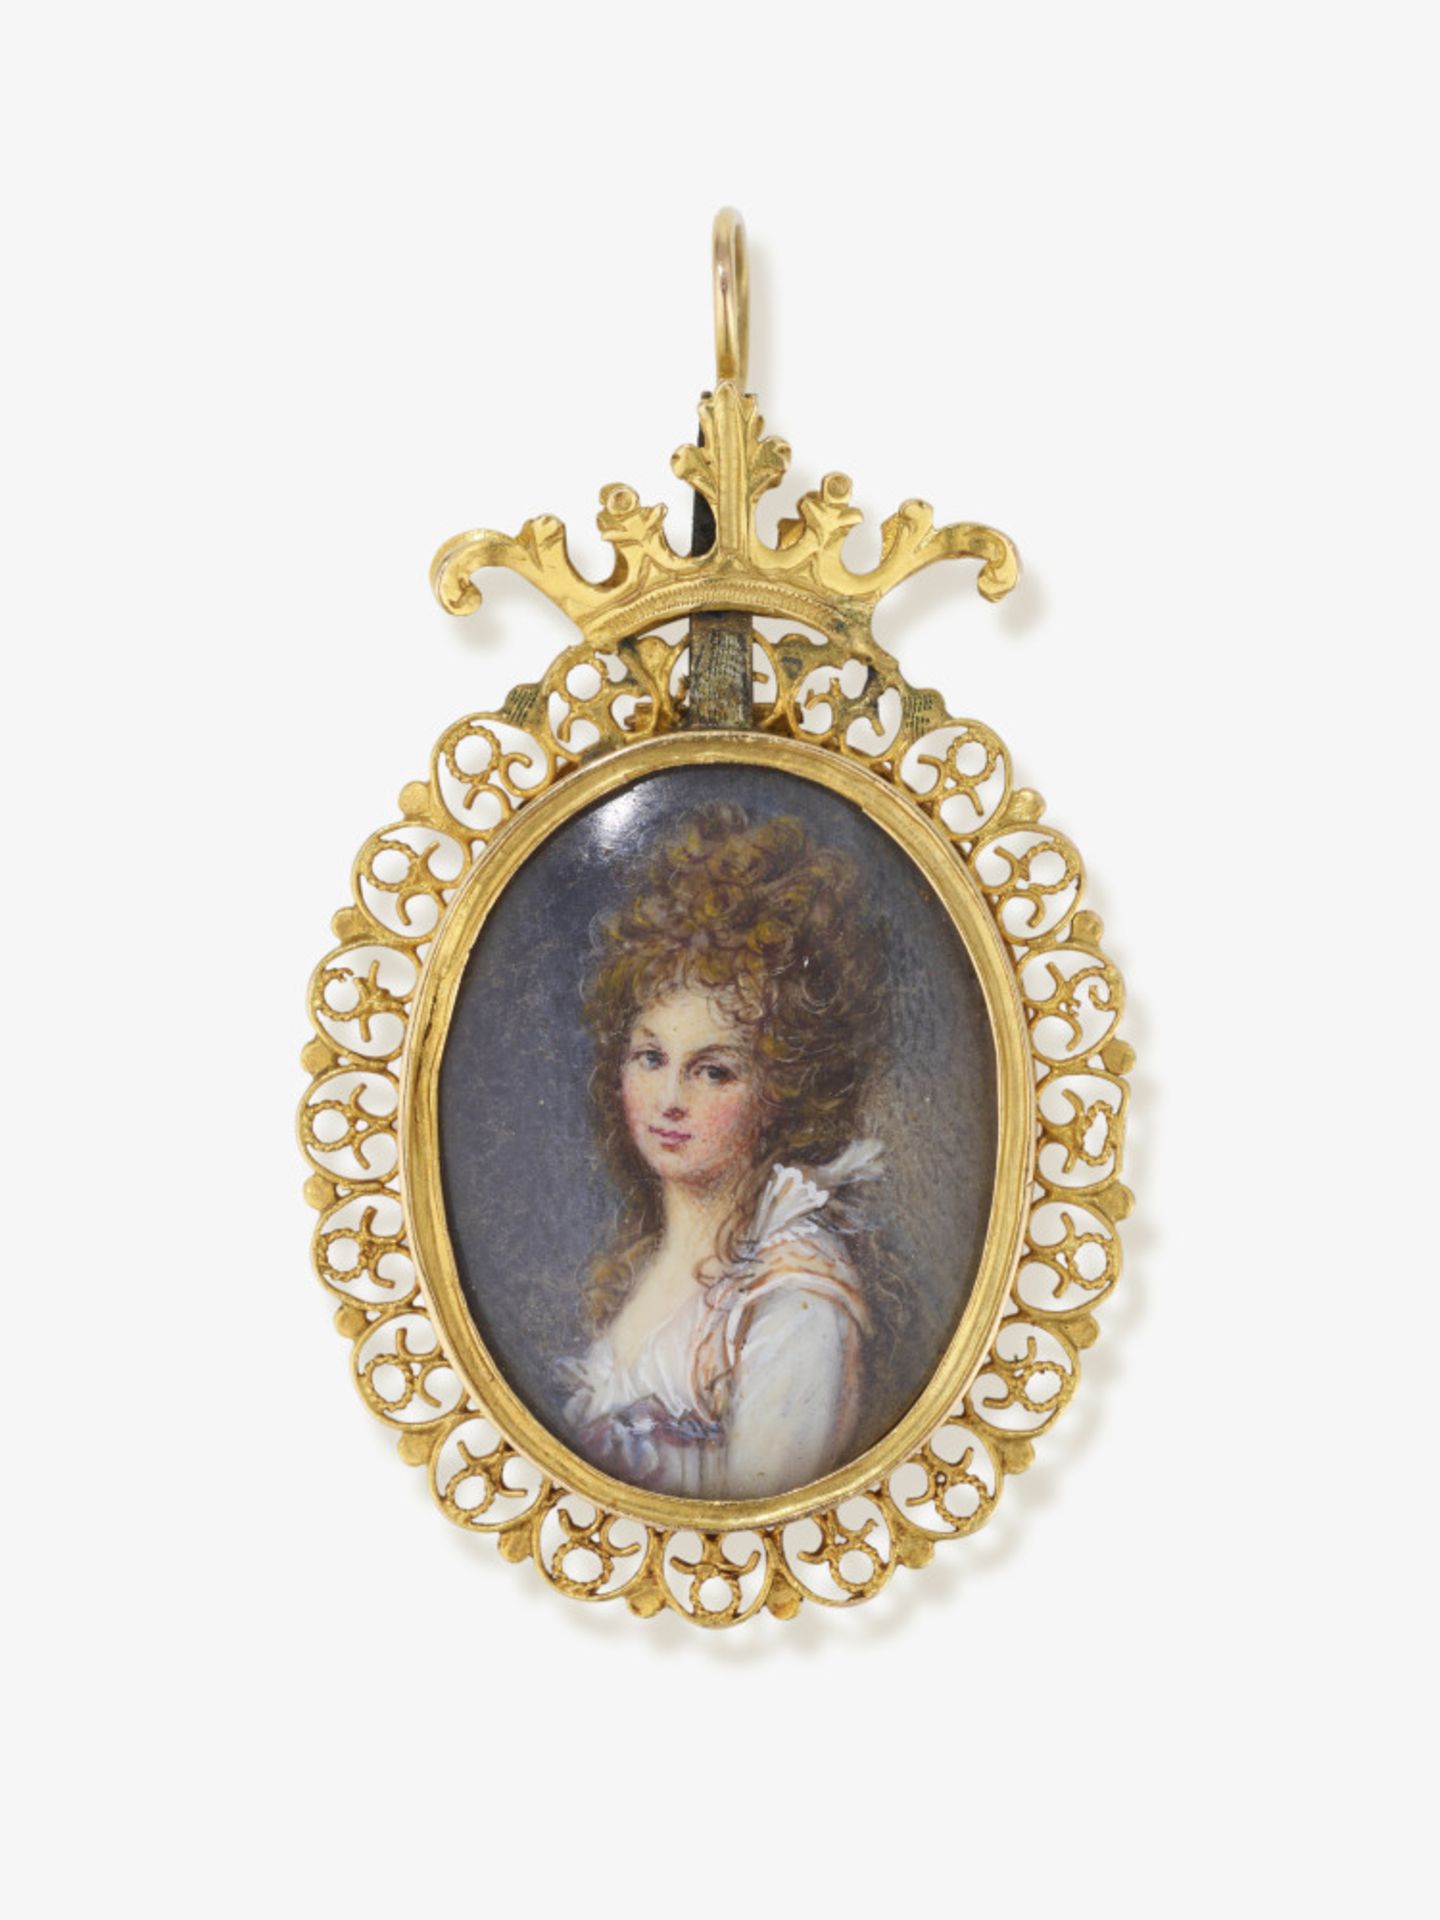 A locket with a portrait miniature, half-length portrait of a young lady - England, circa 1780-1790